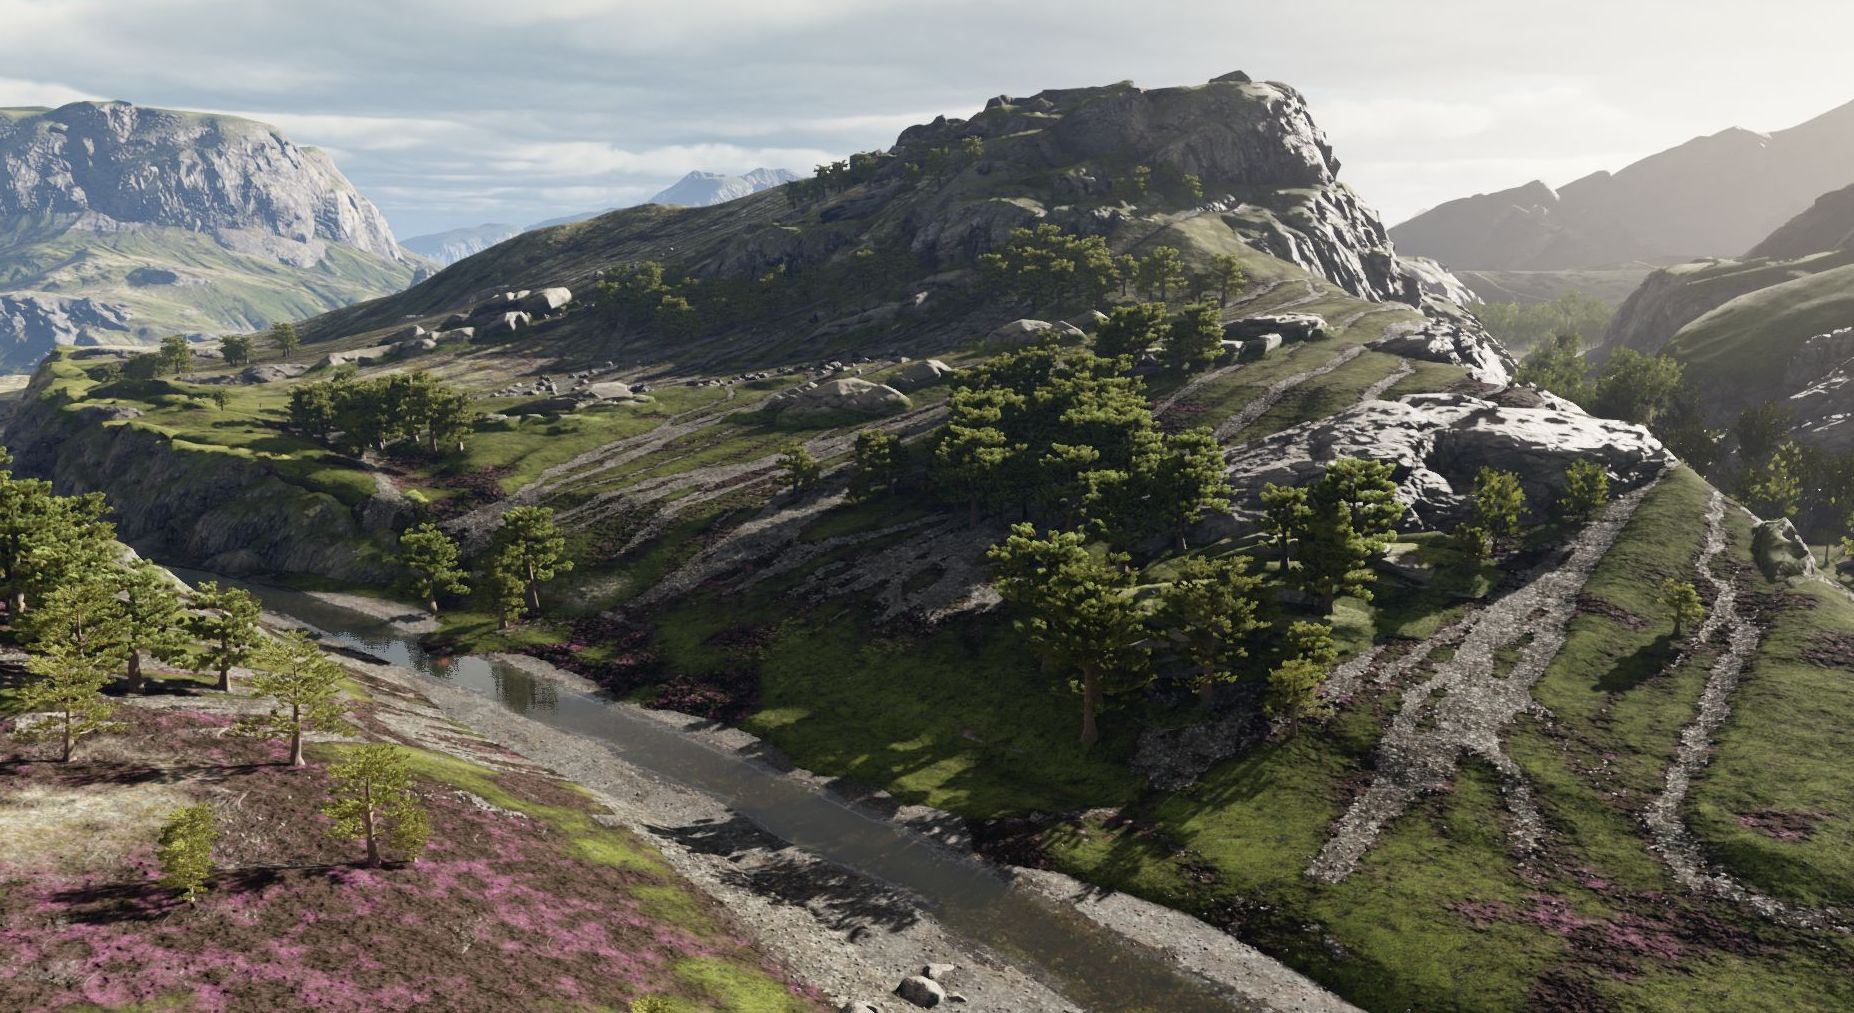 A foliage scene with CSM covering up to 100 meters, and Ray Traced Distance Field shadows covering up to 1.2 kilometers.